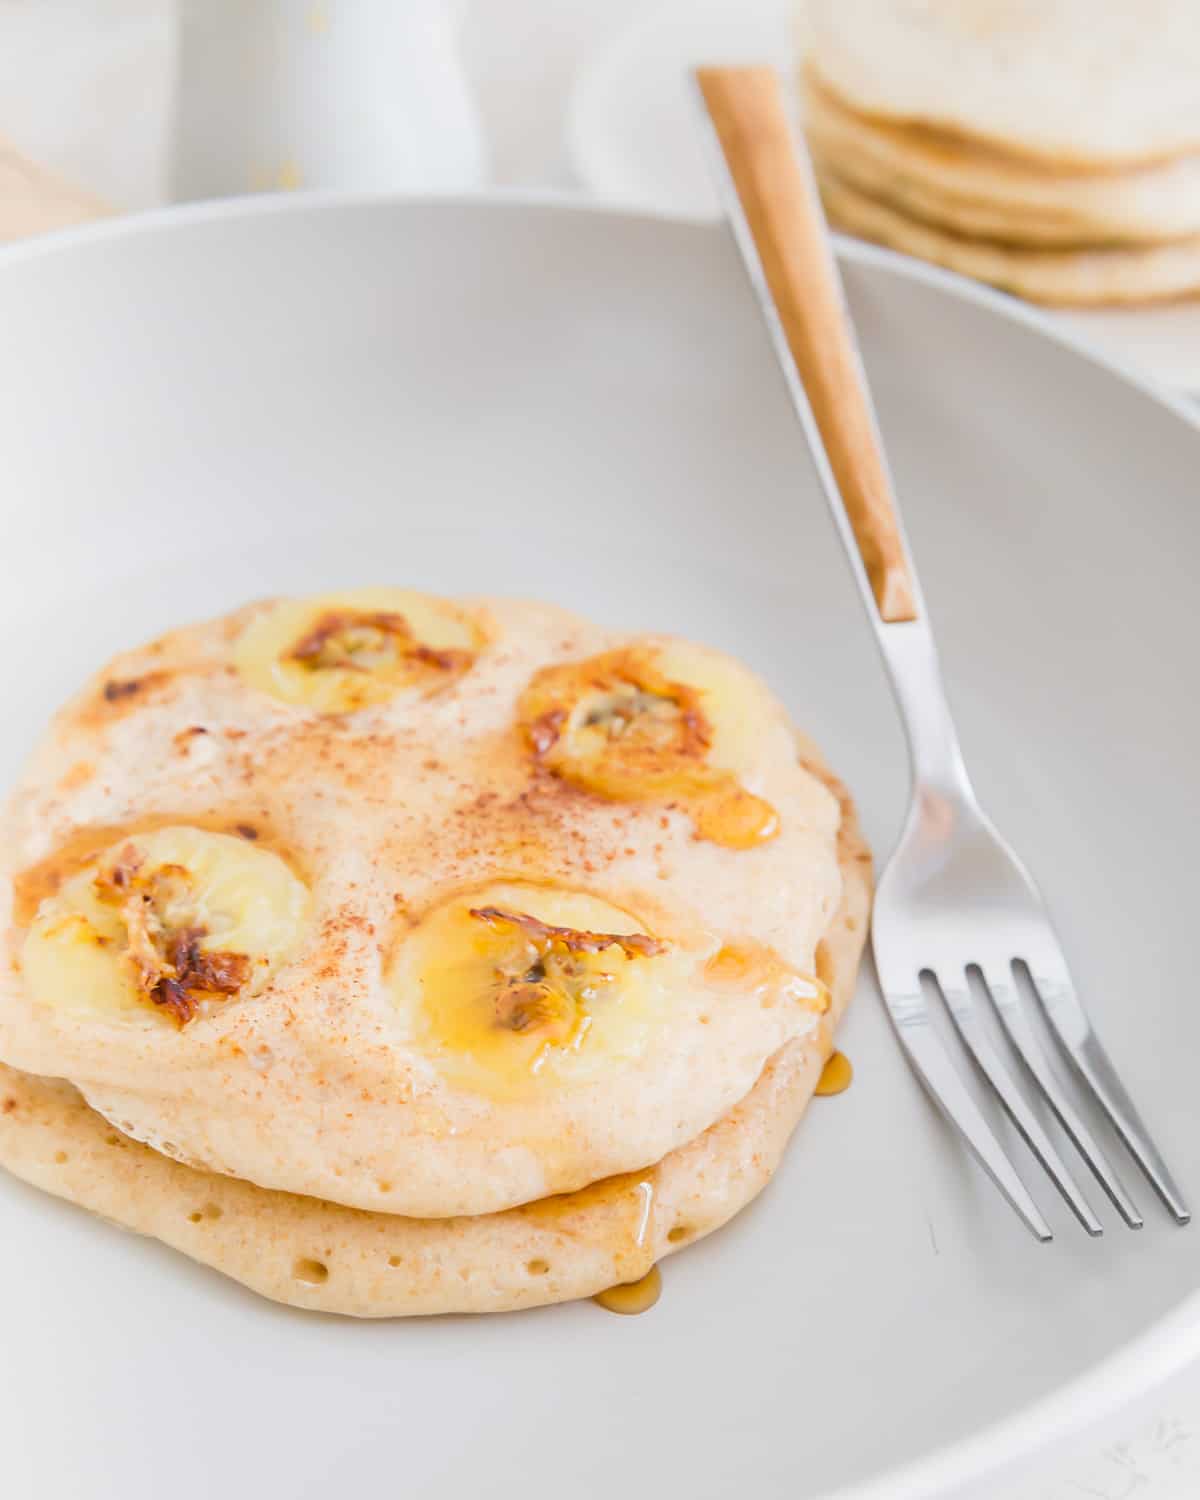 Leftover sourdough starter, also known as "discard" is the sole ingredient in these banana cinnamon sourdough pancakes.